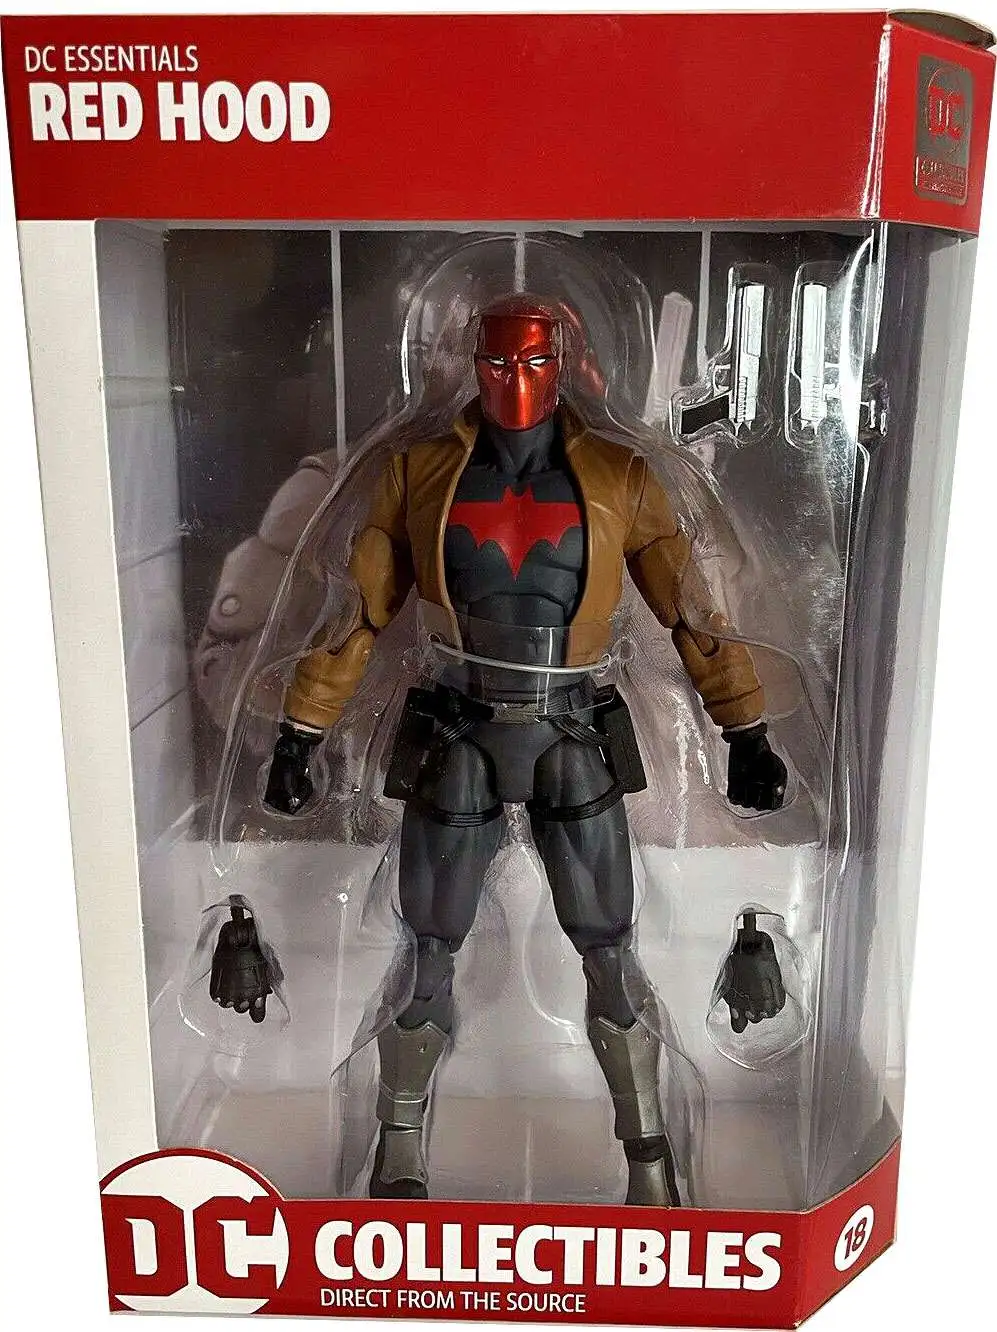 DC Essentials Red Hood 7 Action Figure DC Collectibles - ToyWiz